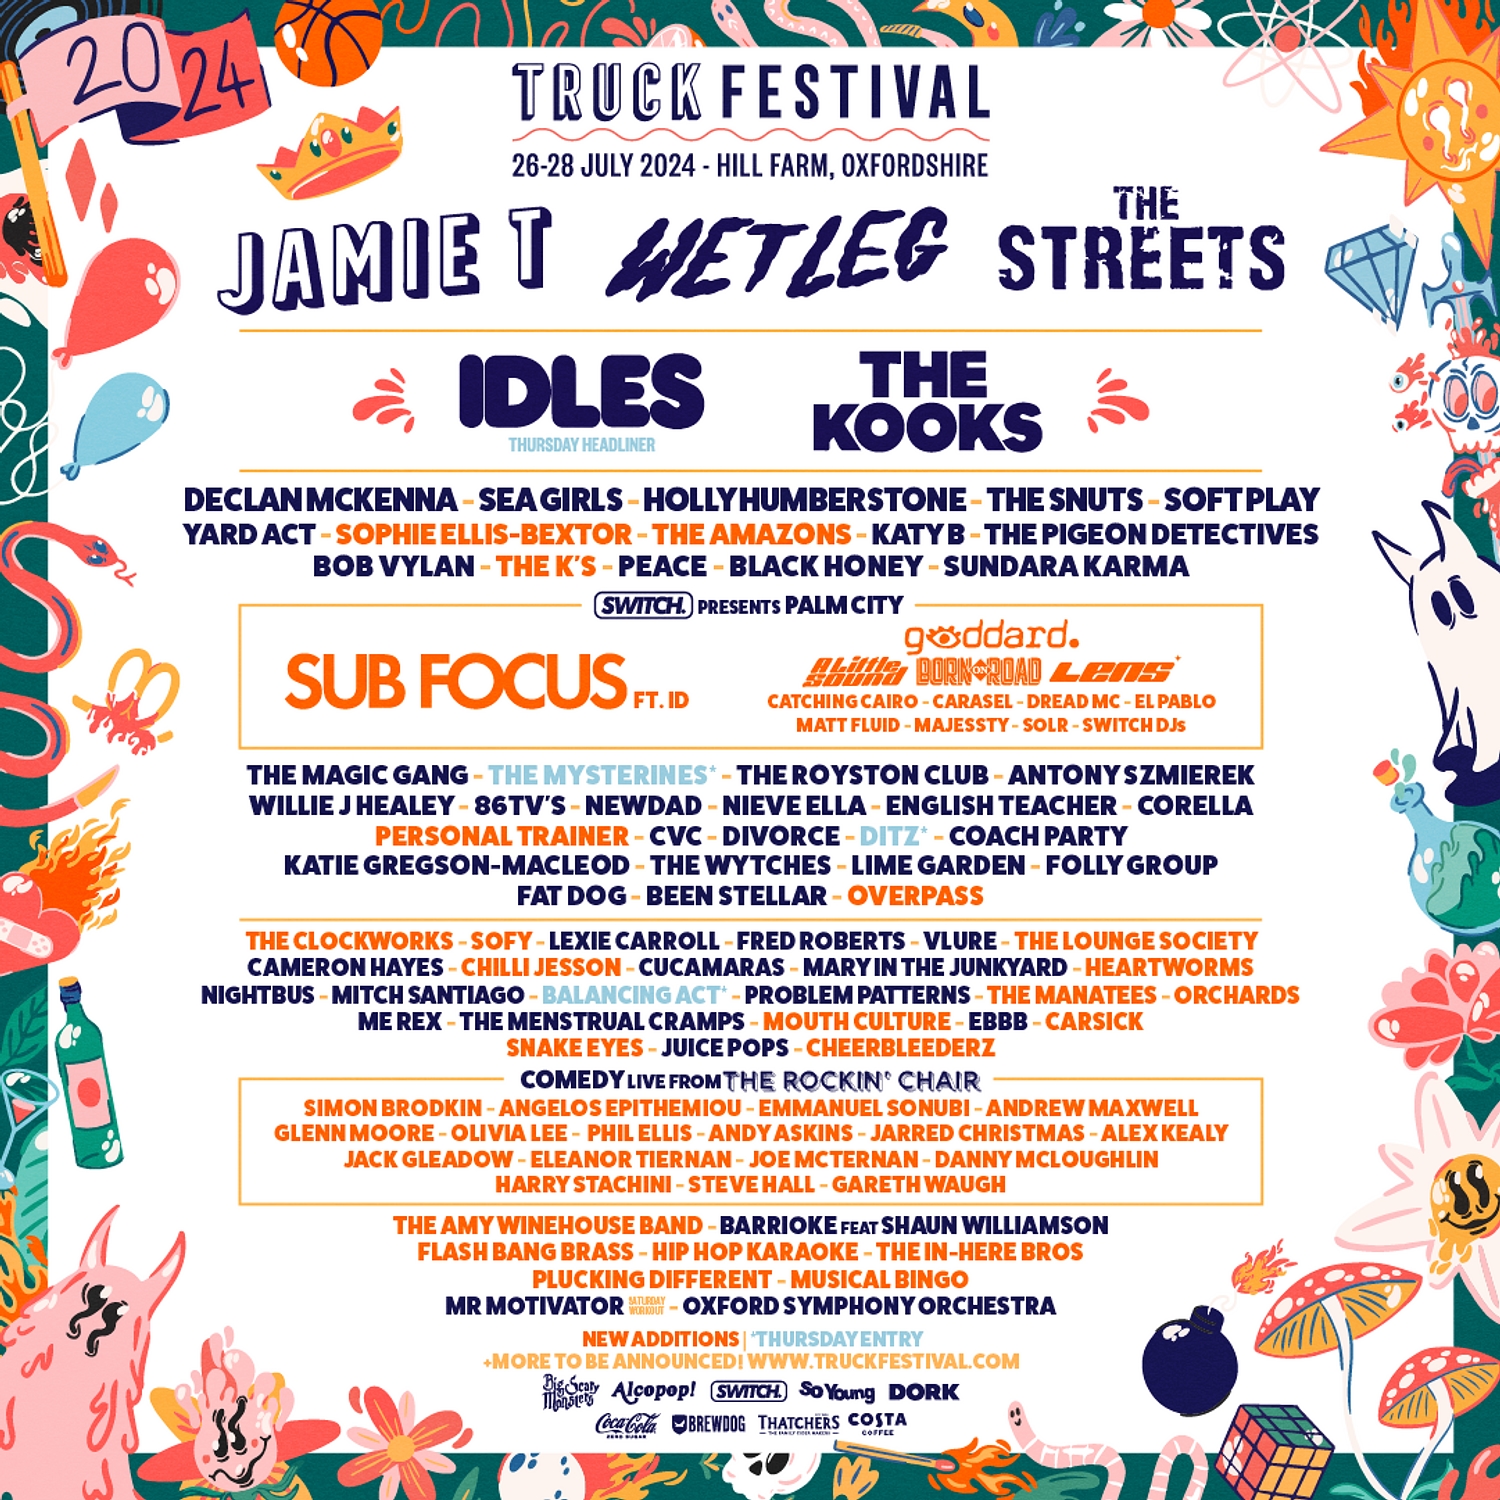 Jamie T, Wet Leg and The Streets to headline Truck Festival 2024